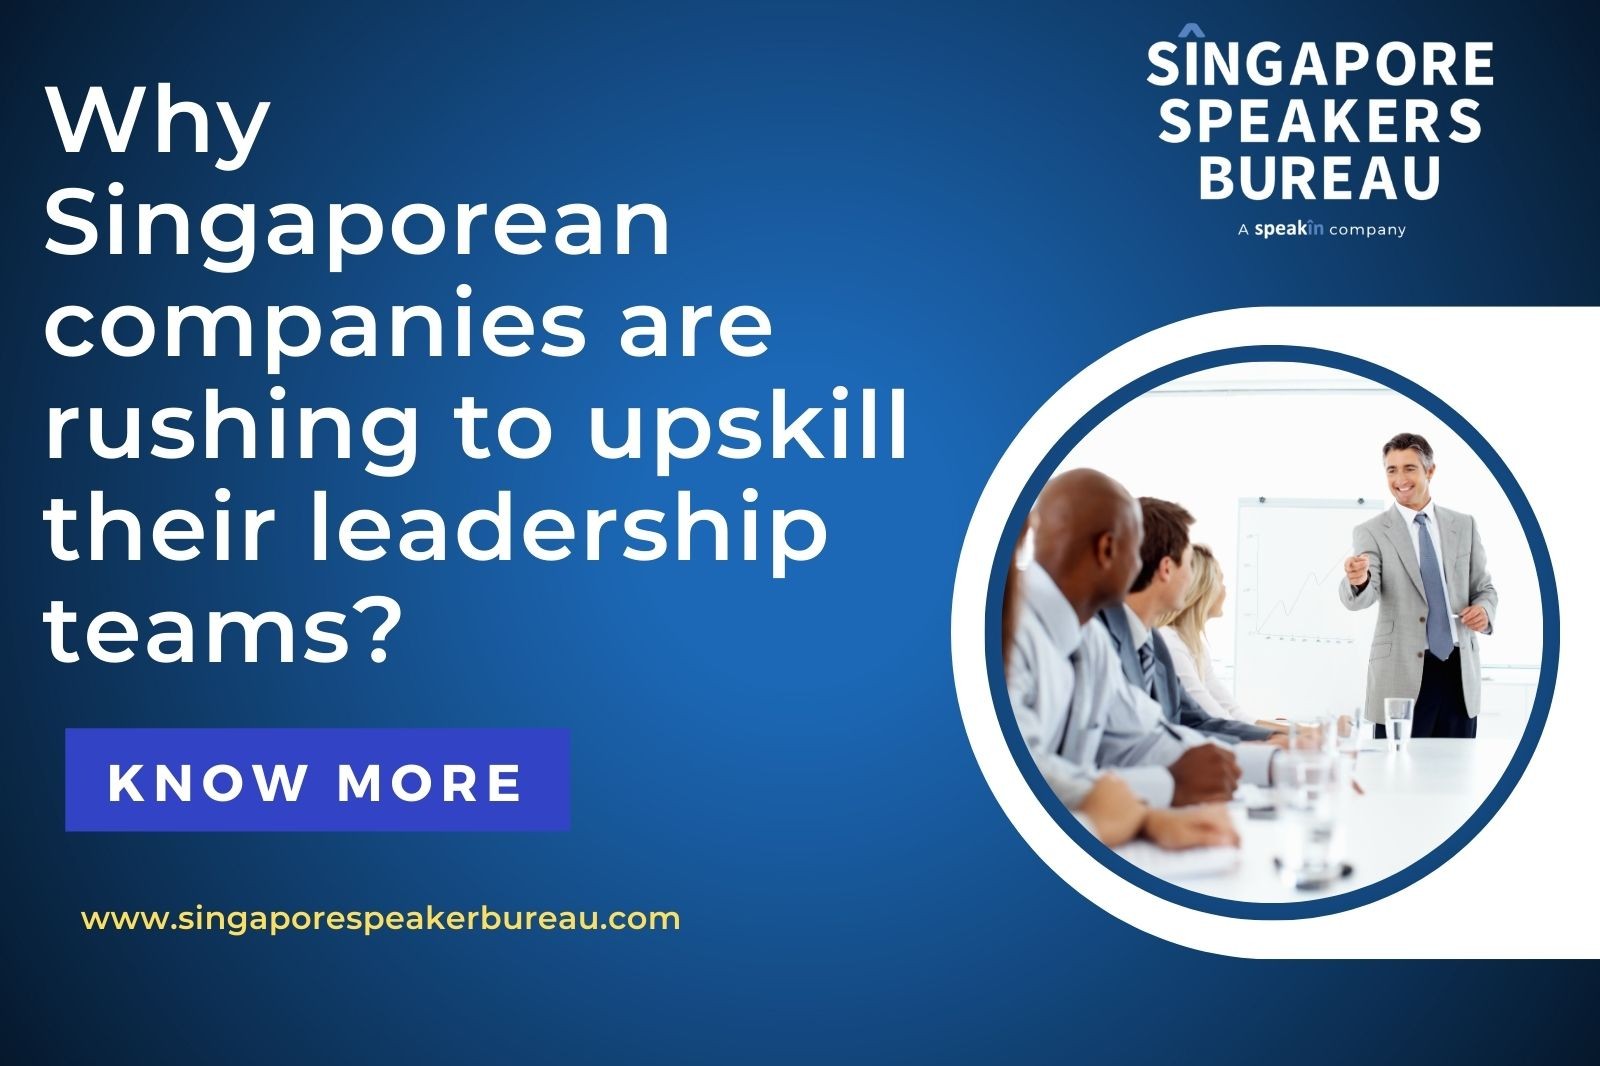 Here is why Singaporean companies are rushing to upskill their leadership teams